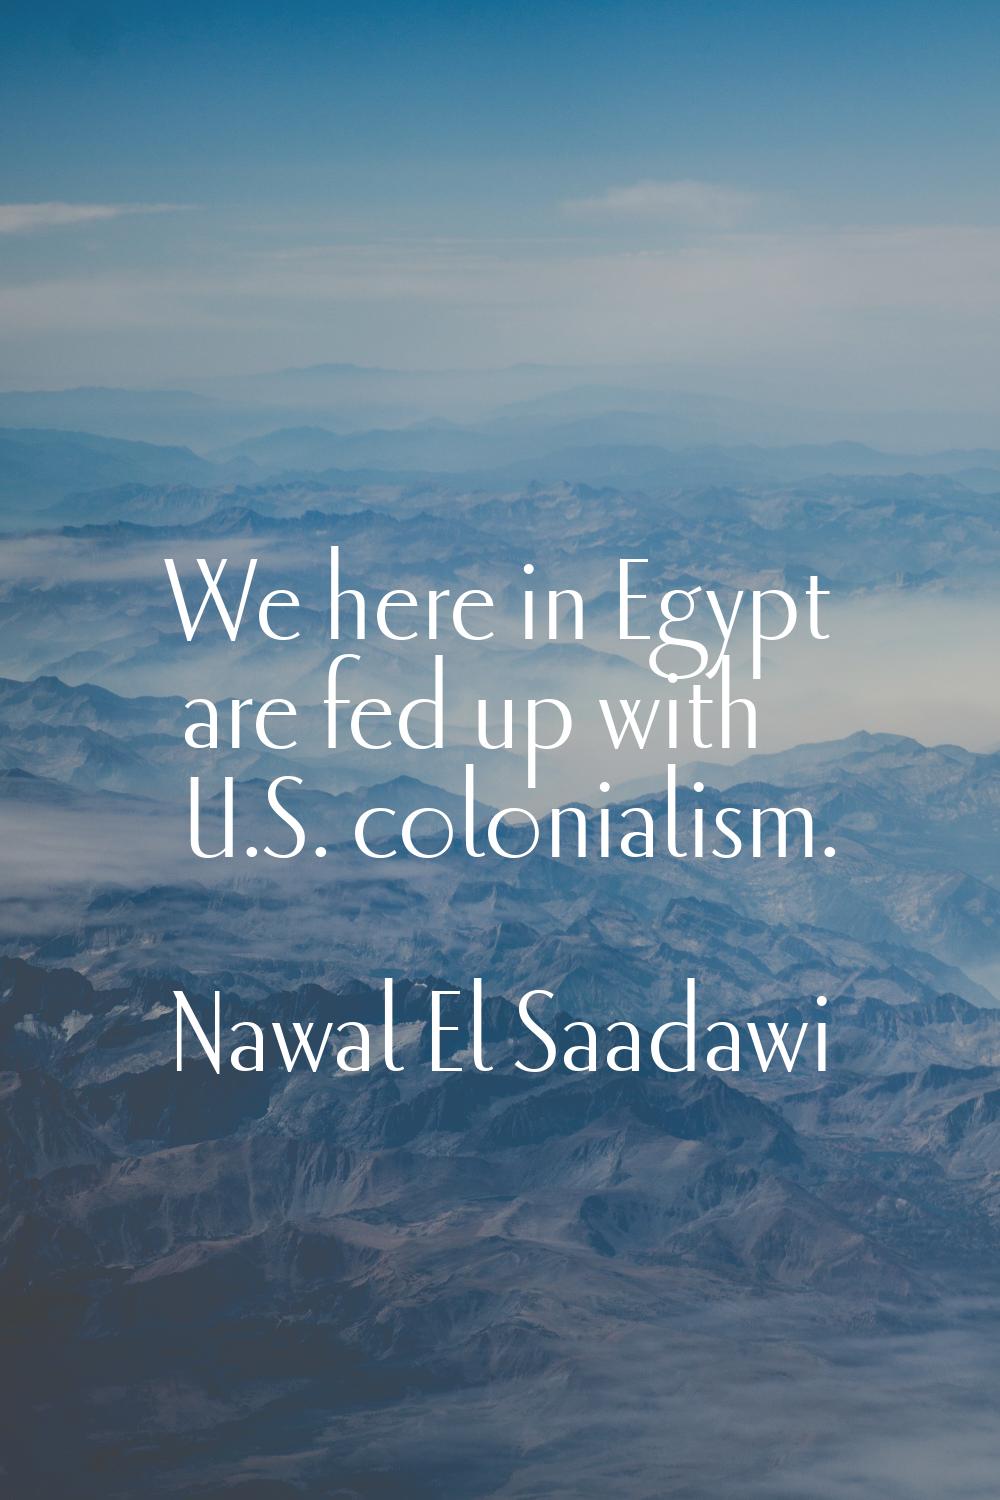 We here in Egypt are fed up with U.S. colonialism.